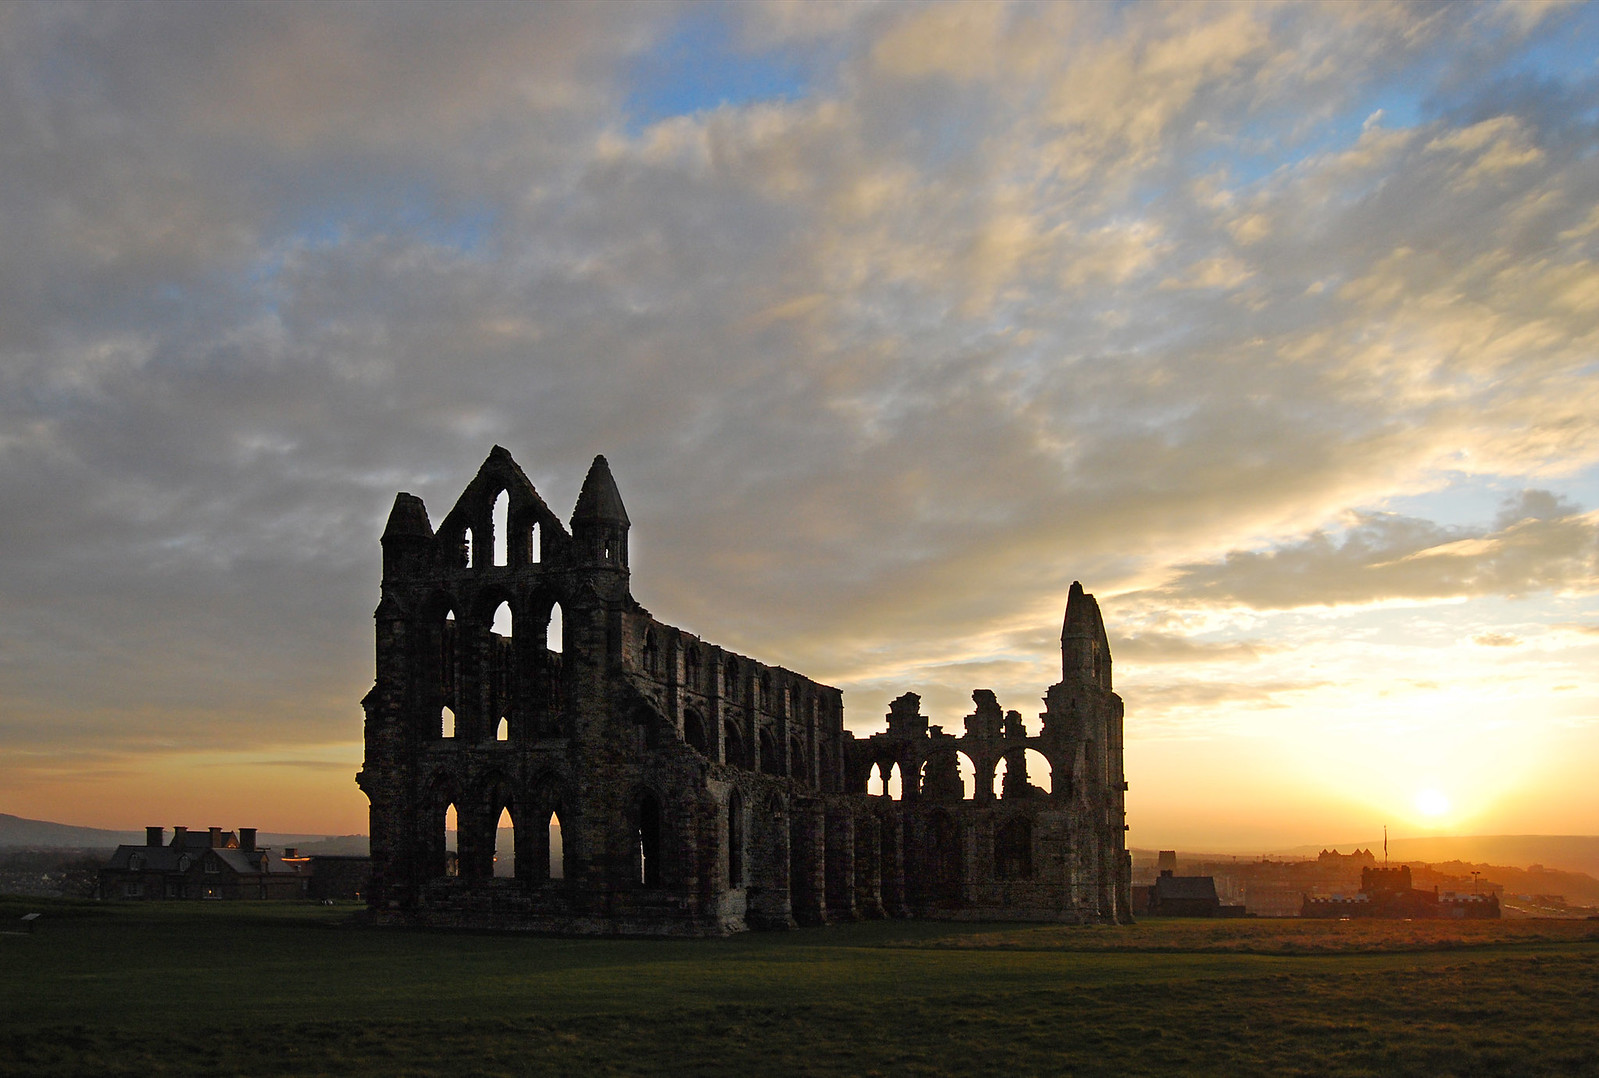 Whitby Abbey at sunset. Credit Ackers72